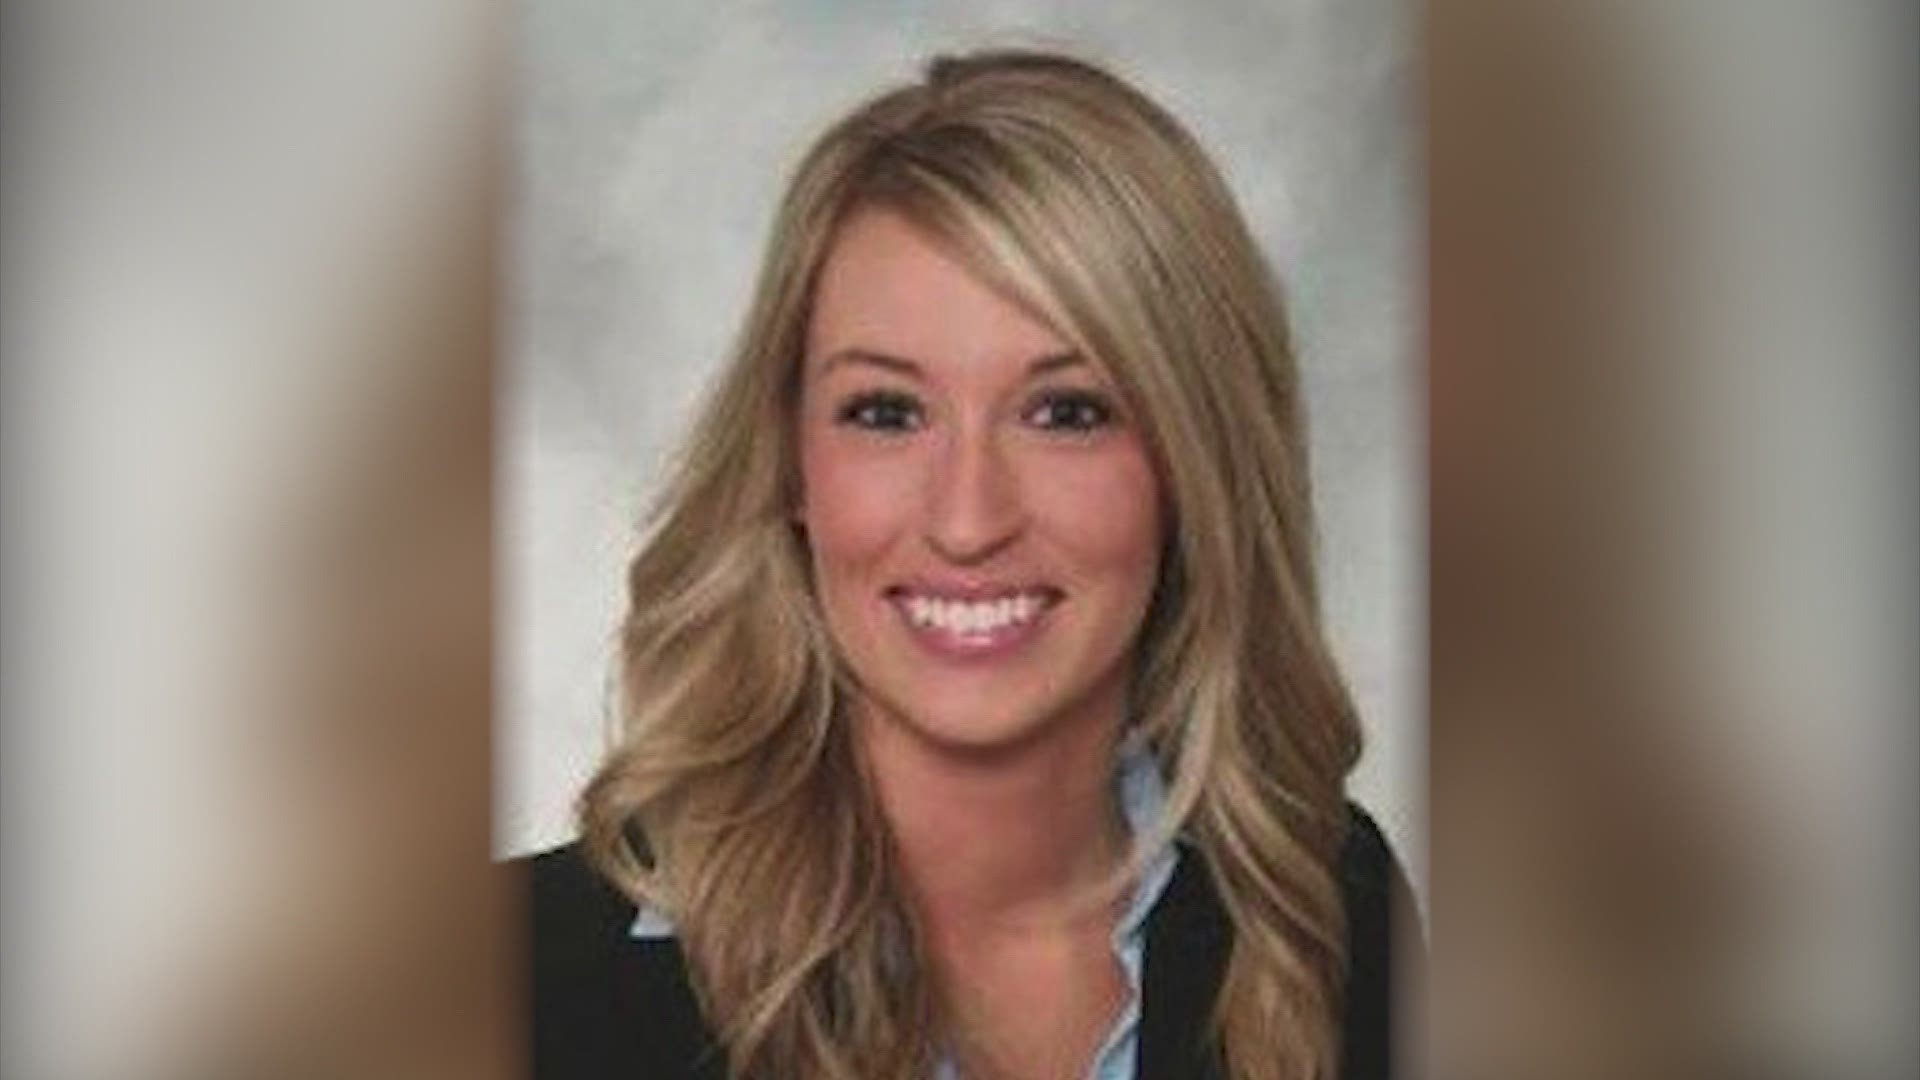 April 8, 2011, is the day realtor Ashley Okland was found murdered inside a townhome she was showing. Police are still searching for answers.